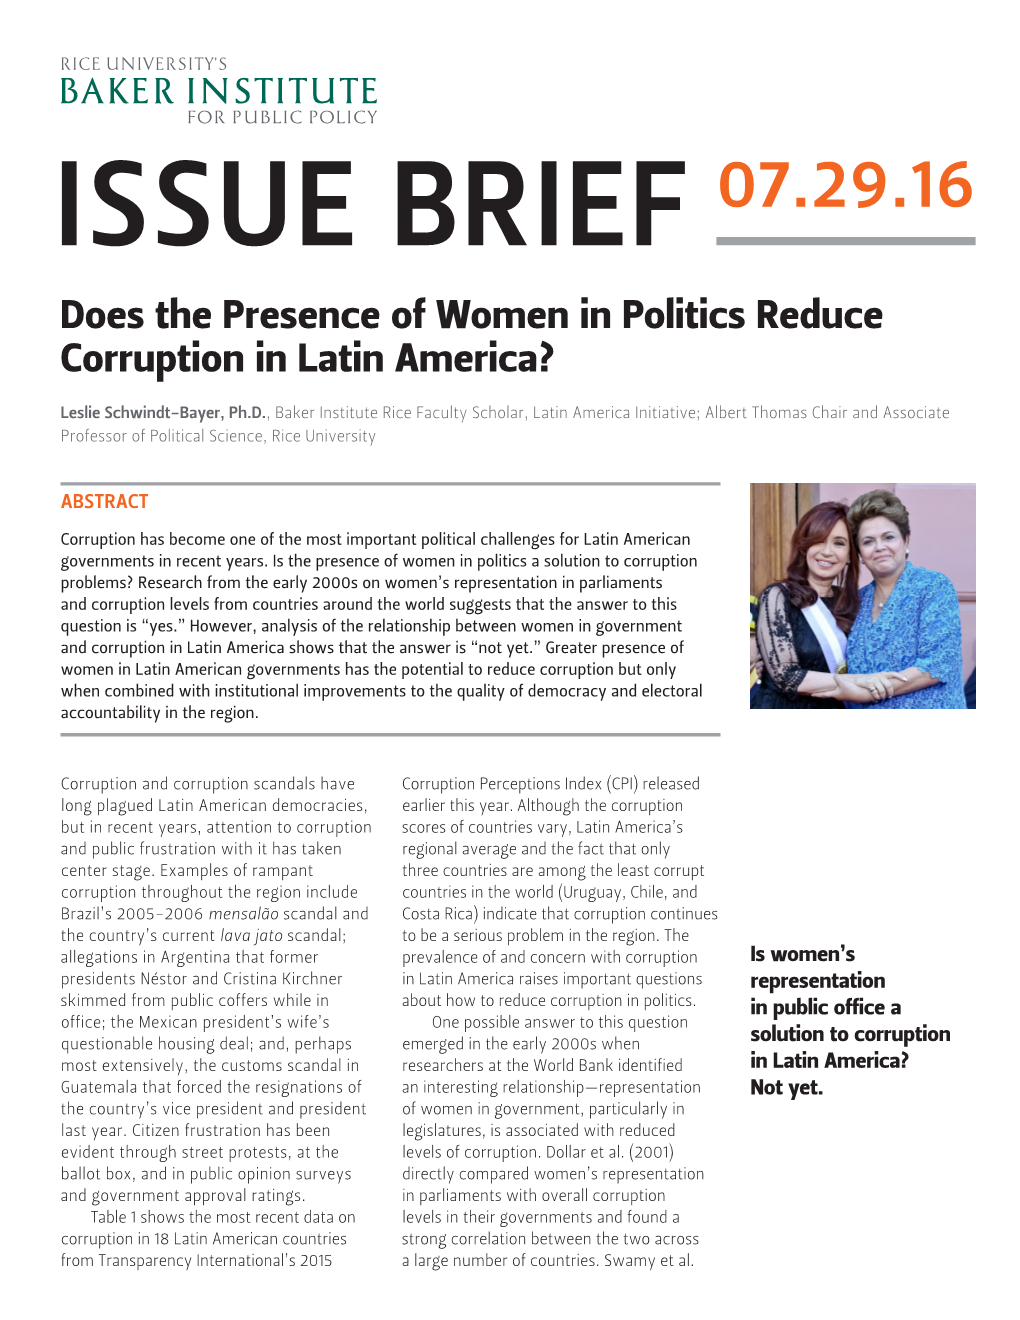 Does the Presence of Women in Politics Reduce Corruption in Latin America?